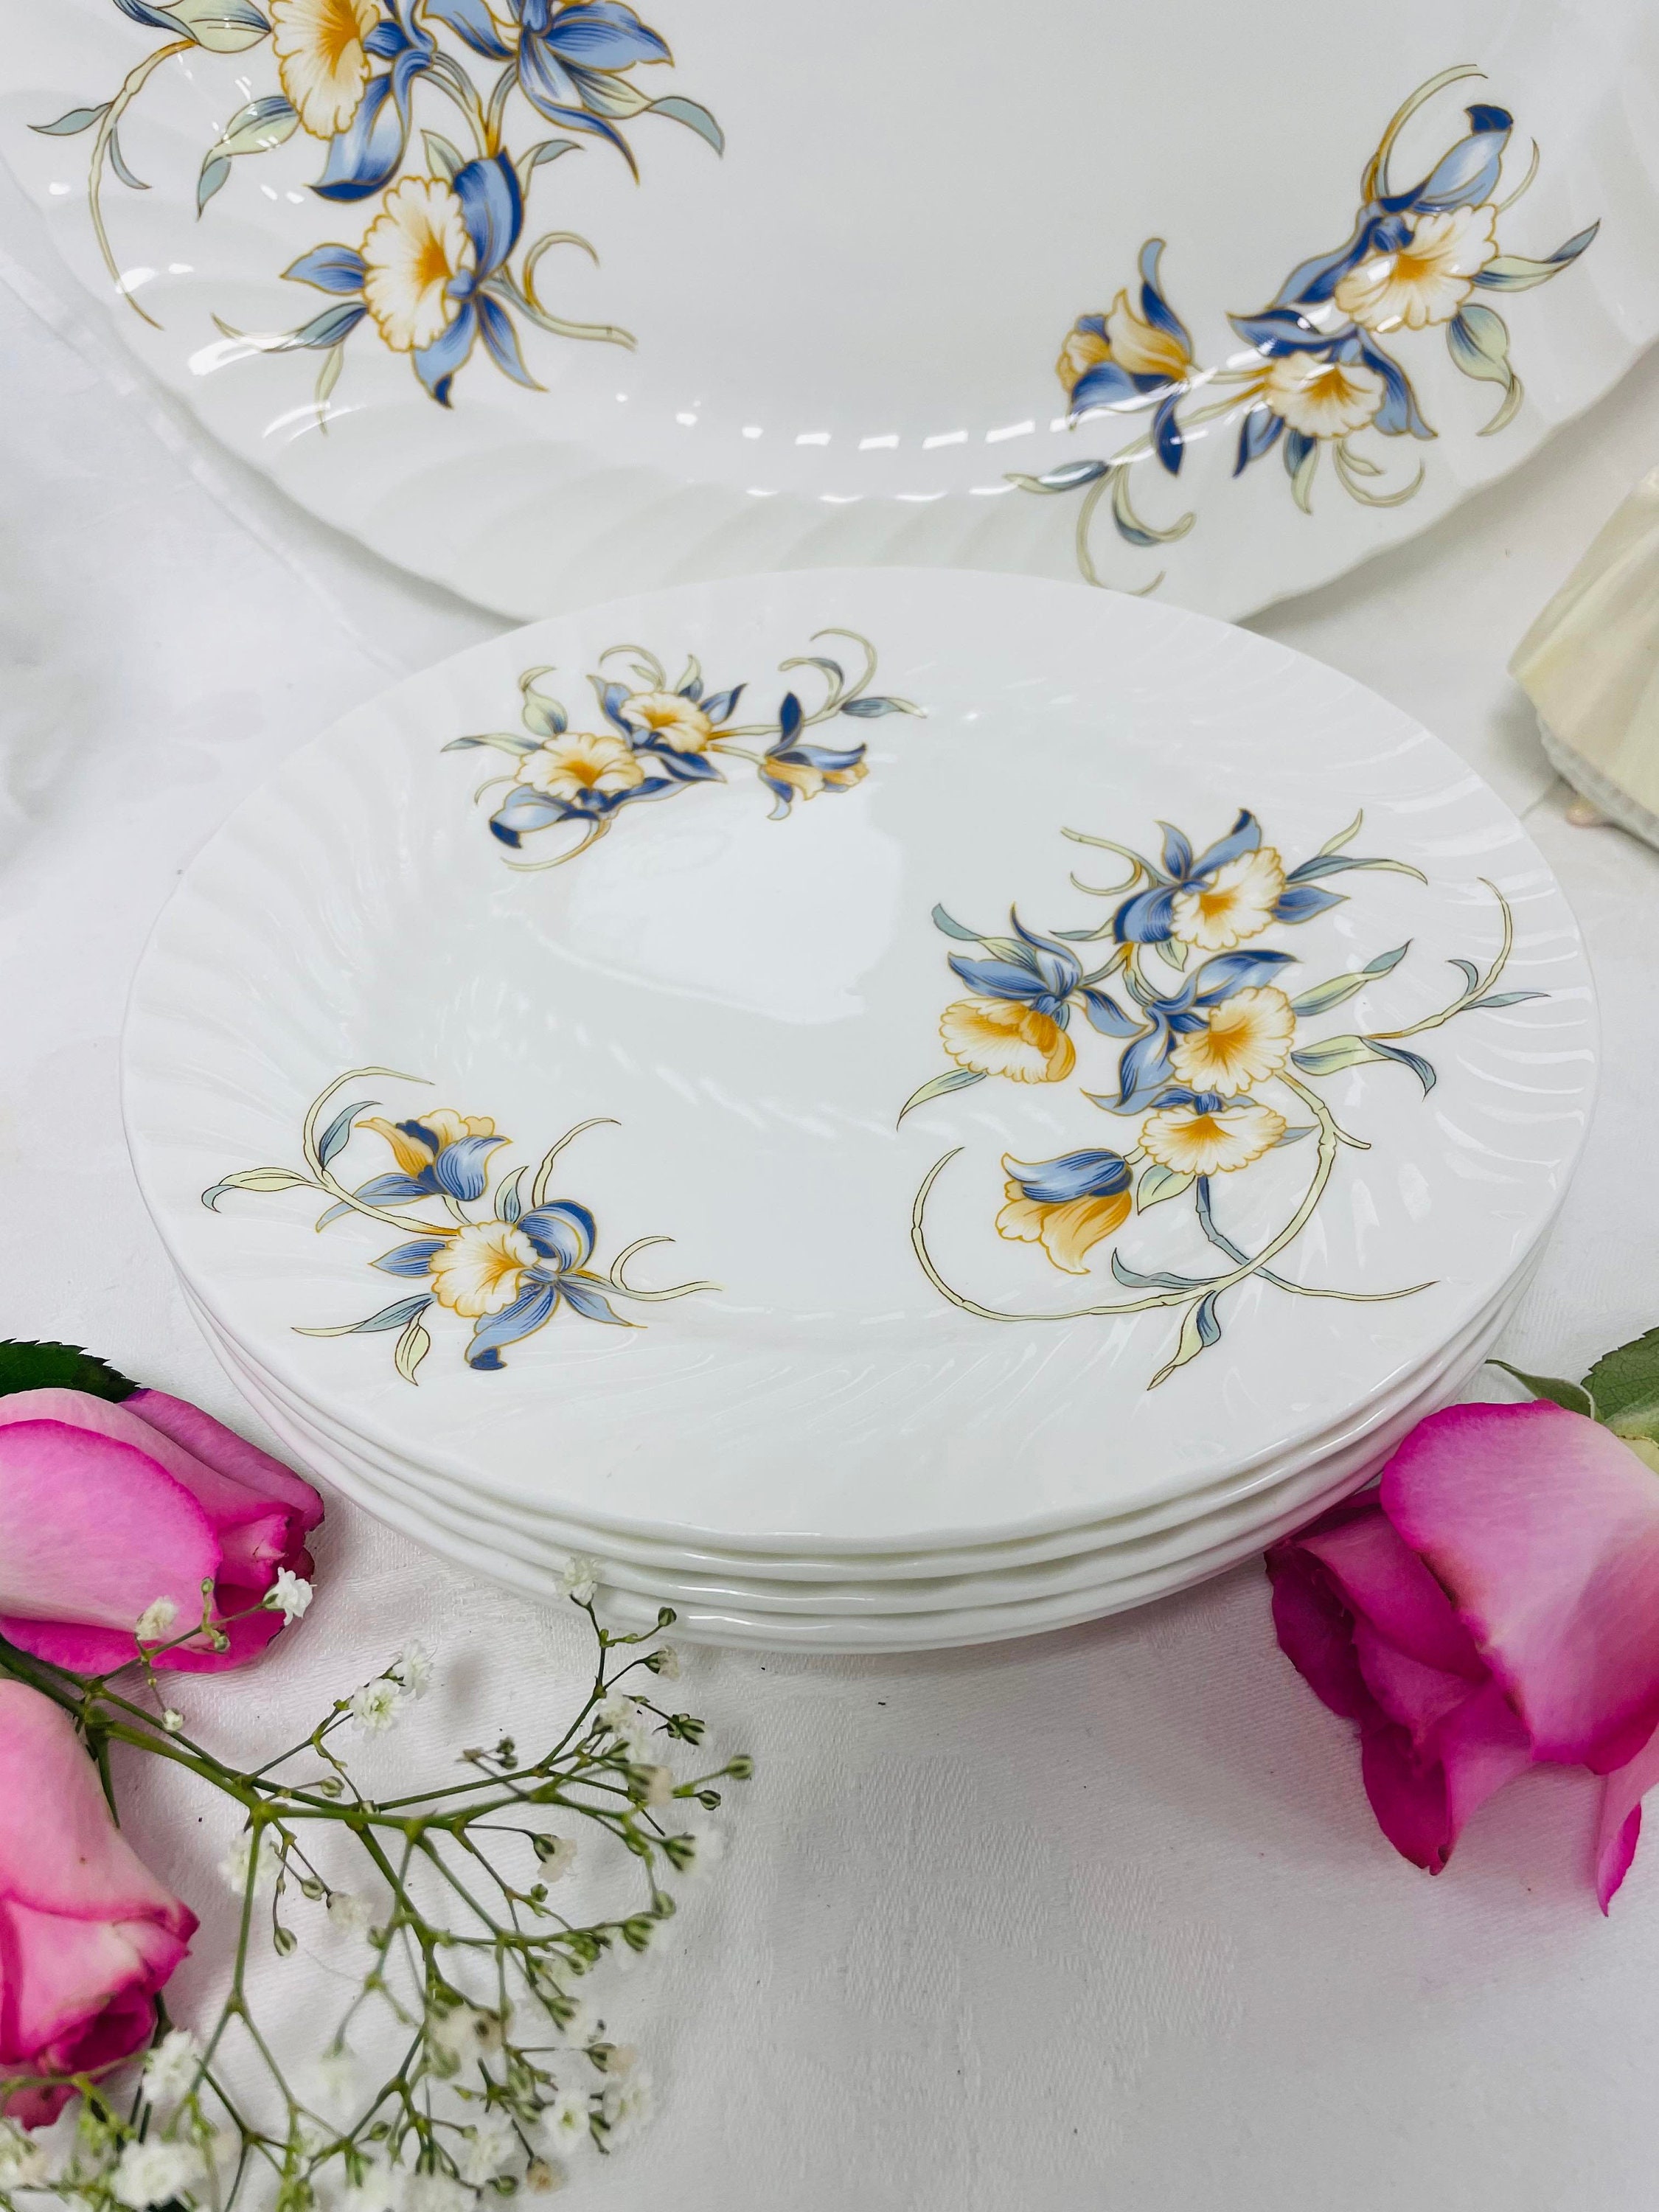 Buy Wholesale China Creative Crystal Glass Plate Salad Plates Cake Tray  Dinner Plates With Wide Gold Rim & Salad Plates,charger Plates,dinner Plates ,glass at USD 2.45